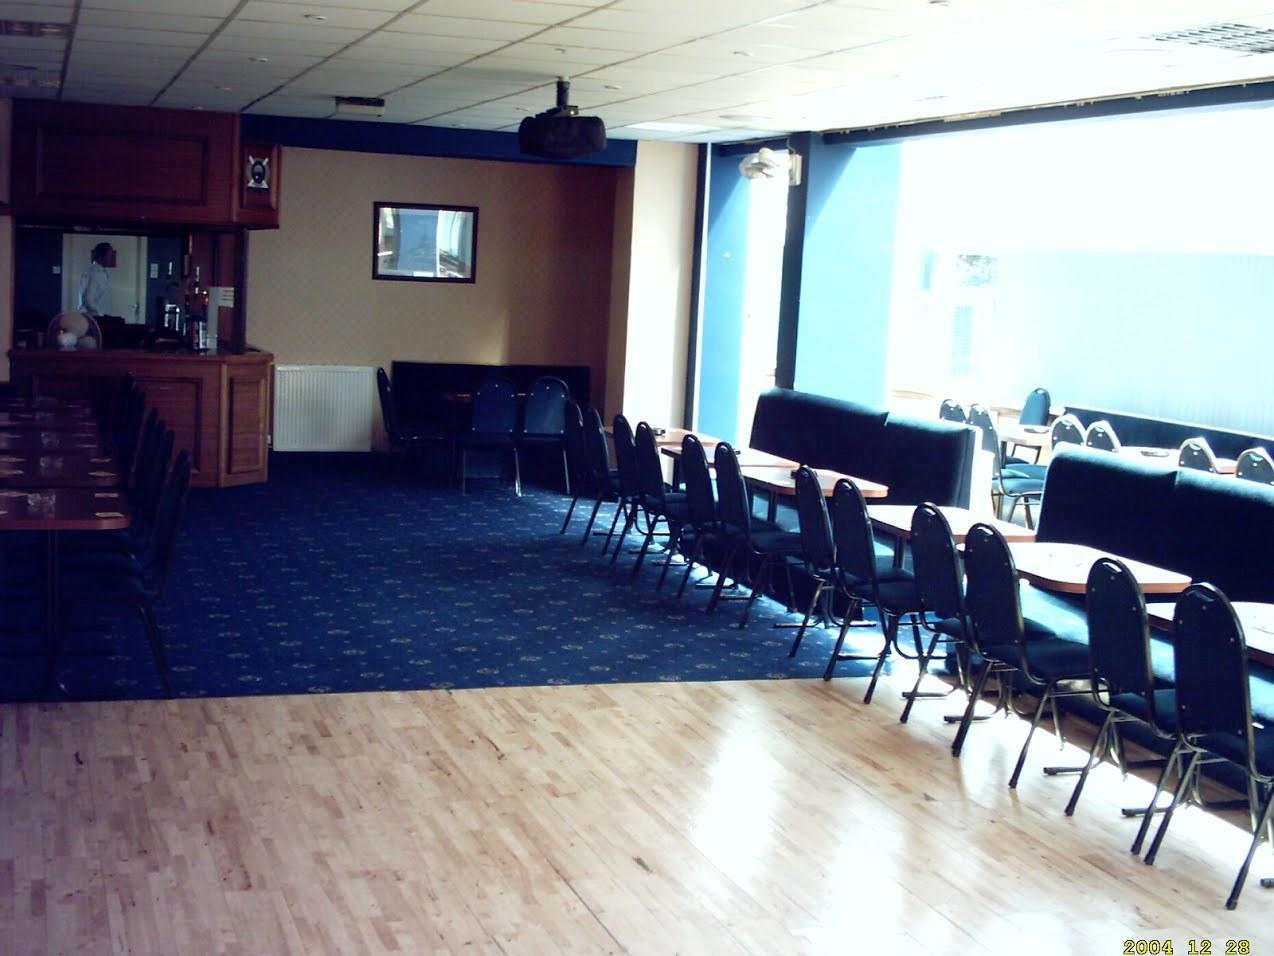 Exclusive Hire, Parkside Bowling Club photo #2